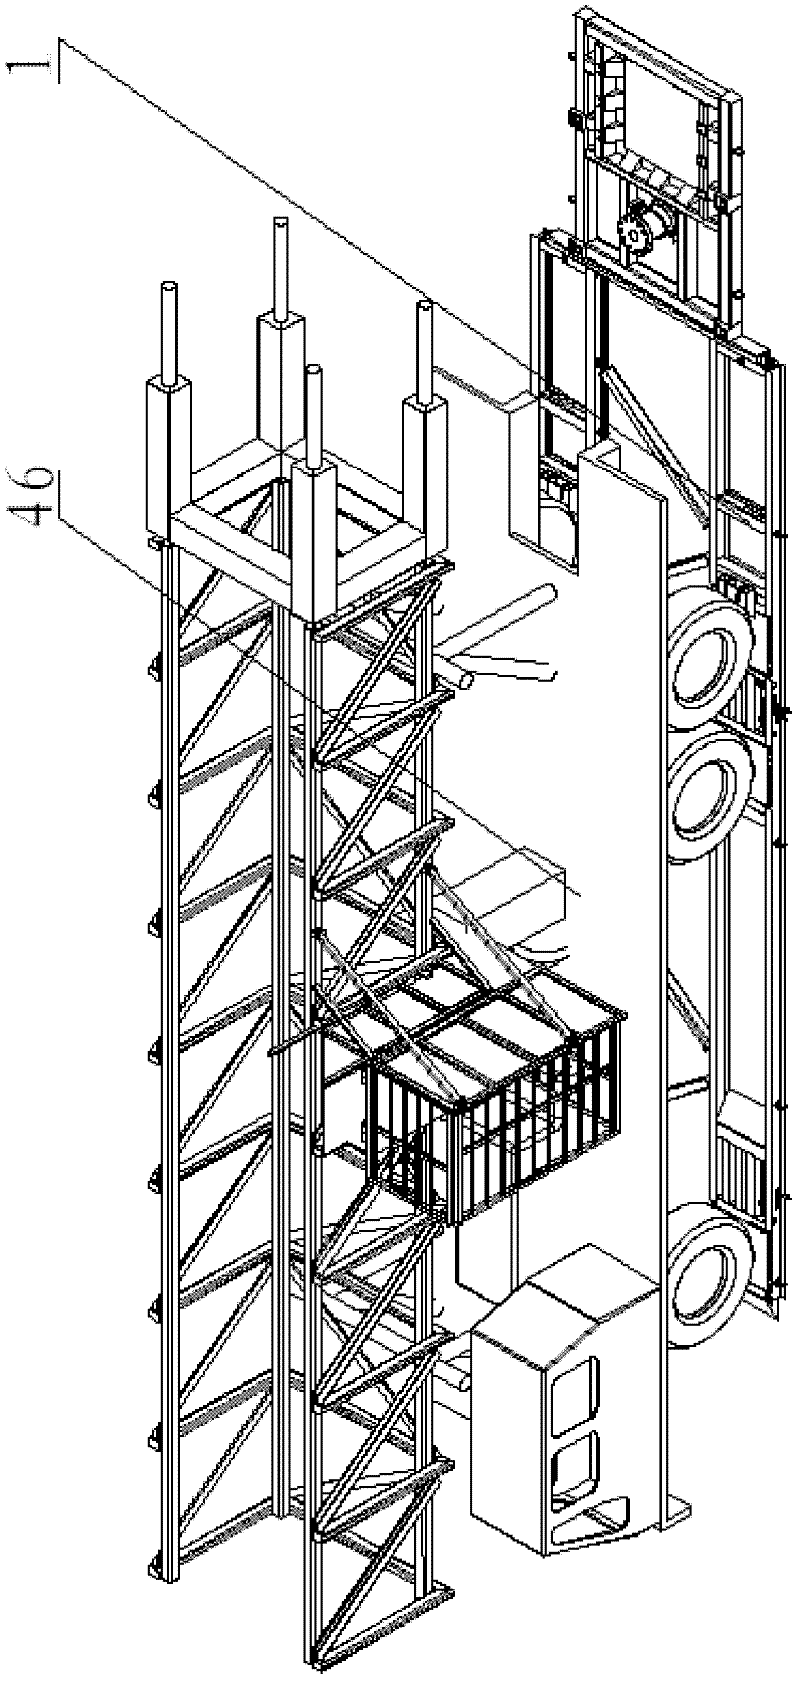 Device for adjusting centration of complete vehicle-mounted service machine to wellhead